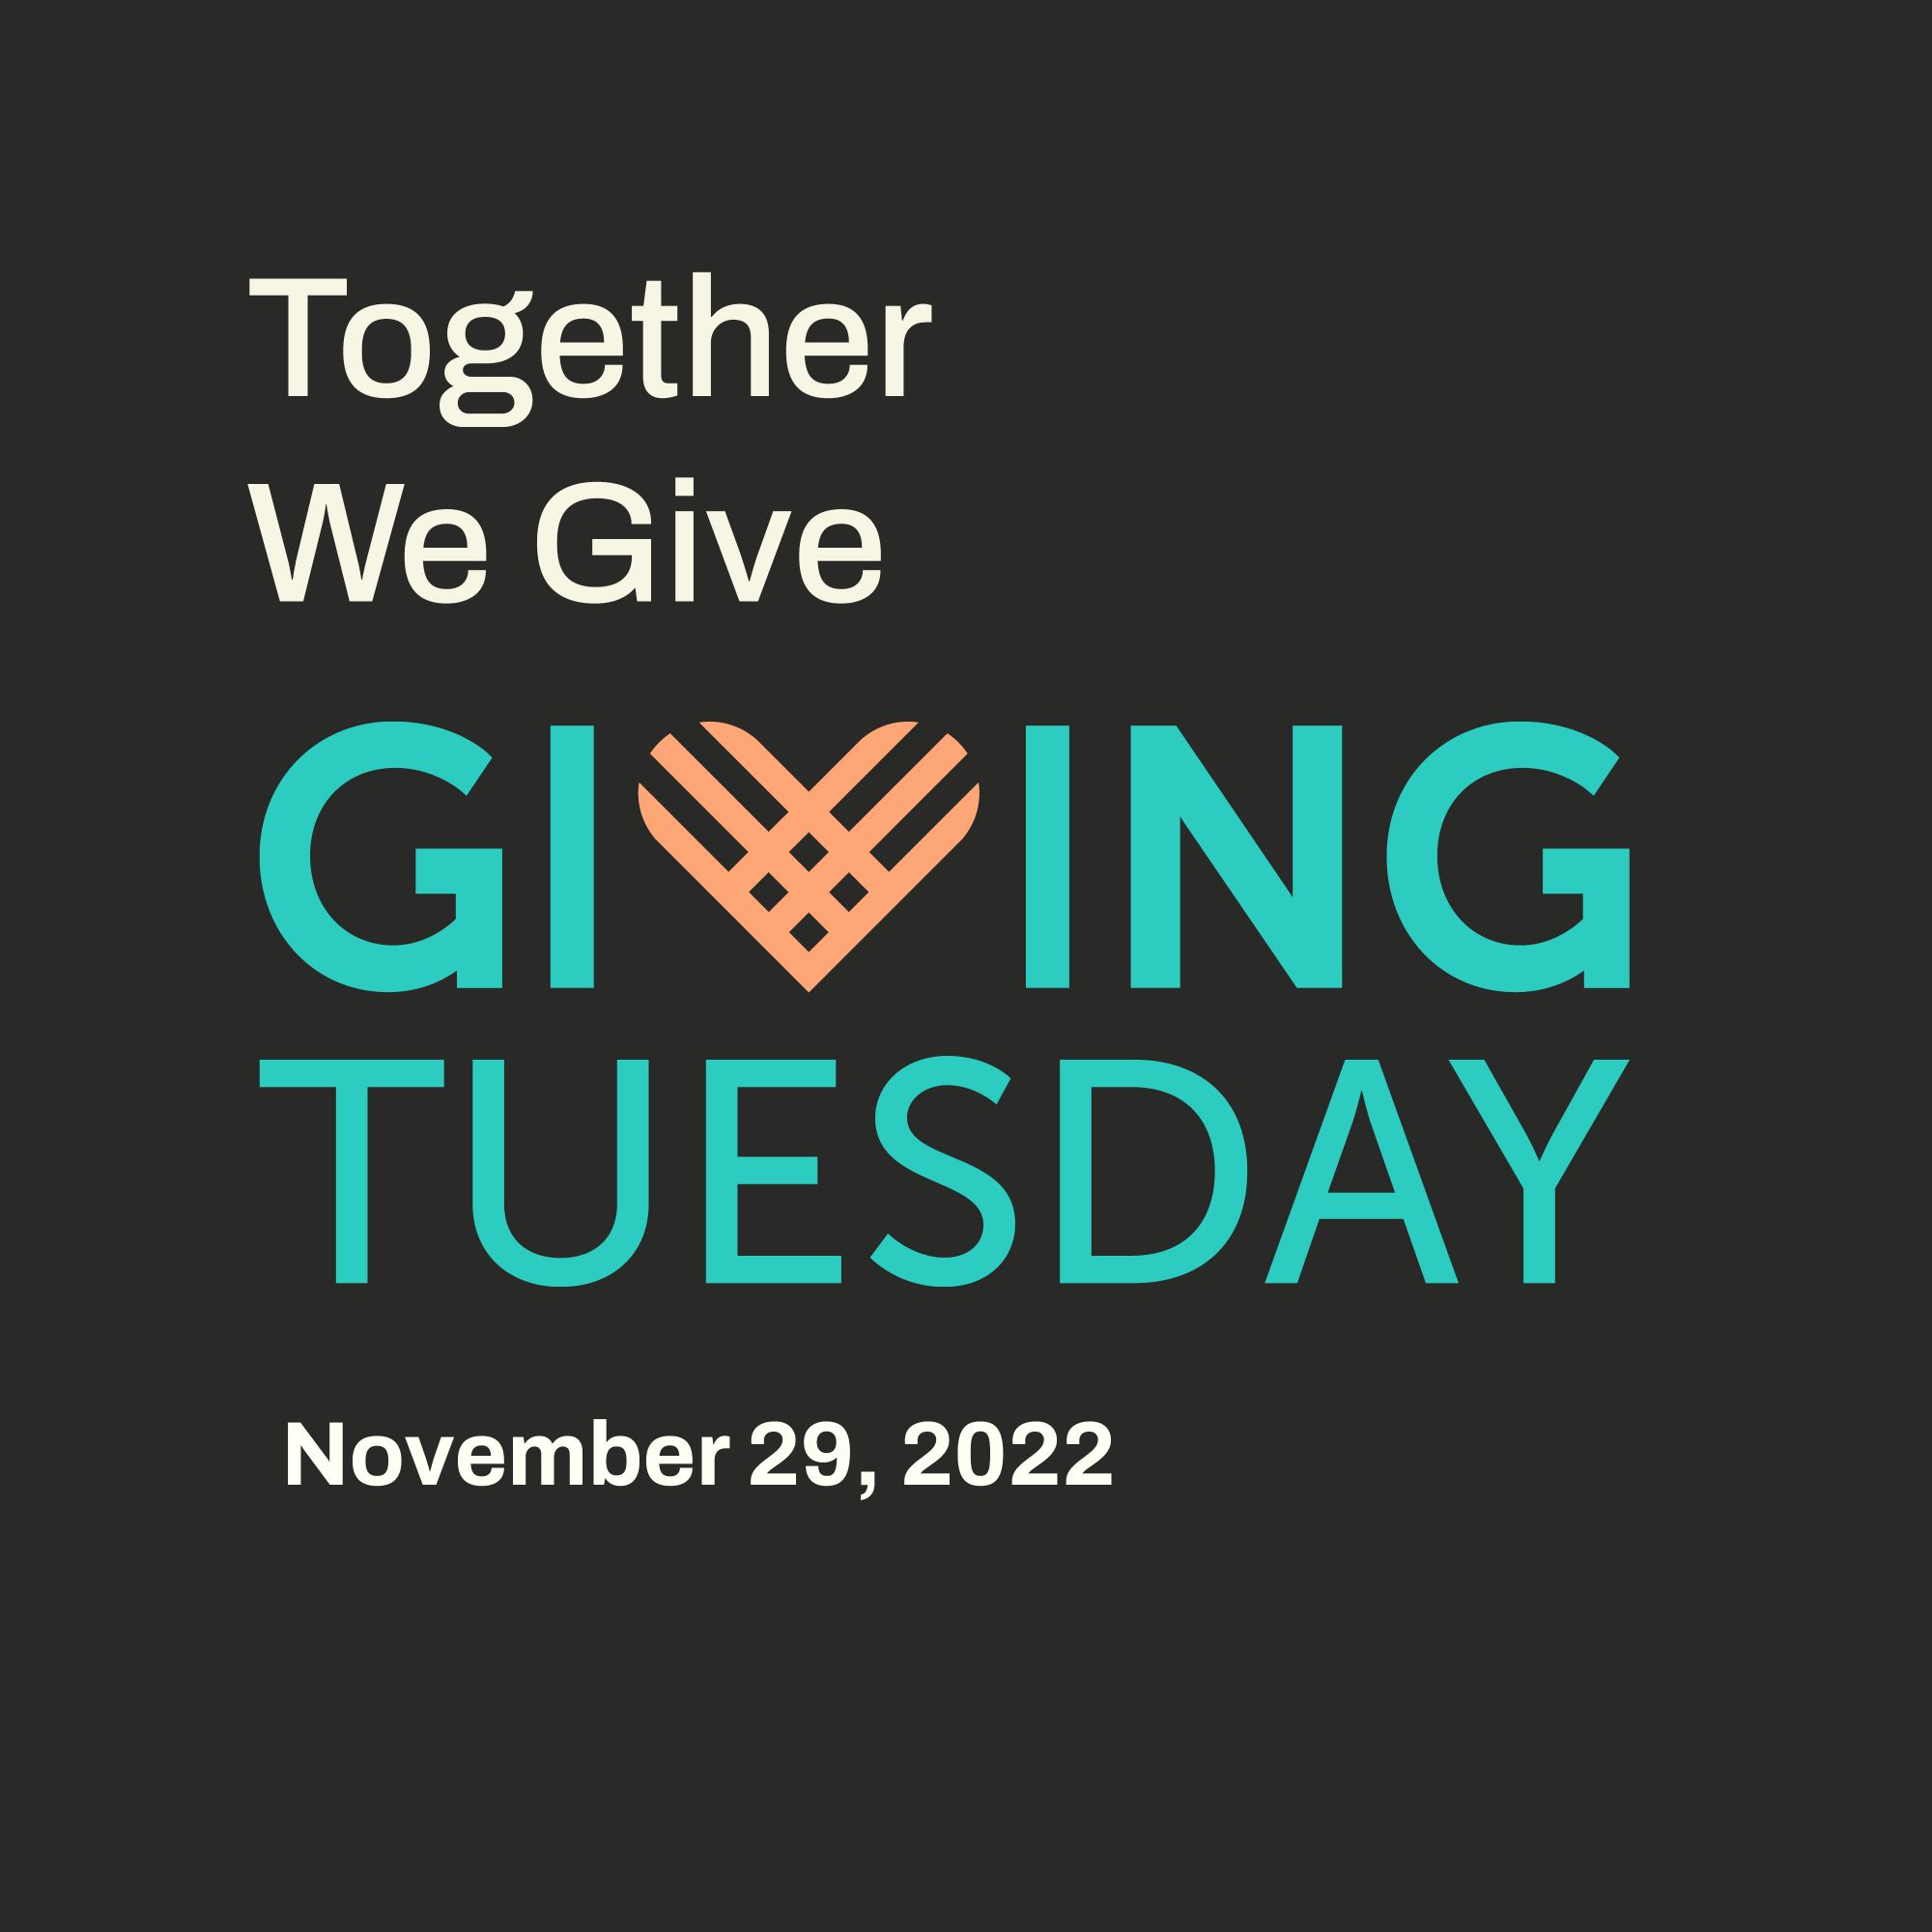 Decorative text reading "Together We Give. Giving Tuesday. November, 29, 2022."